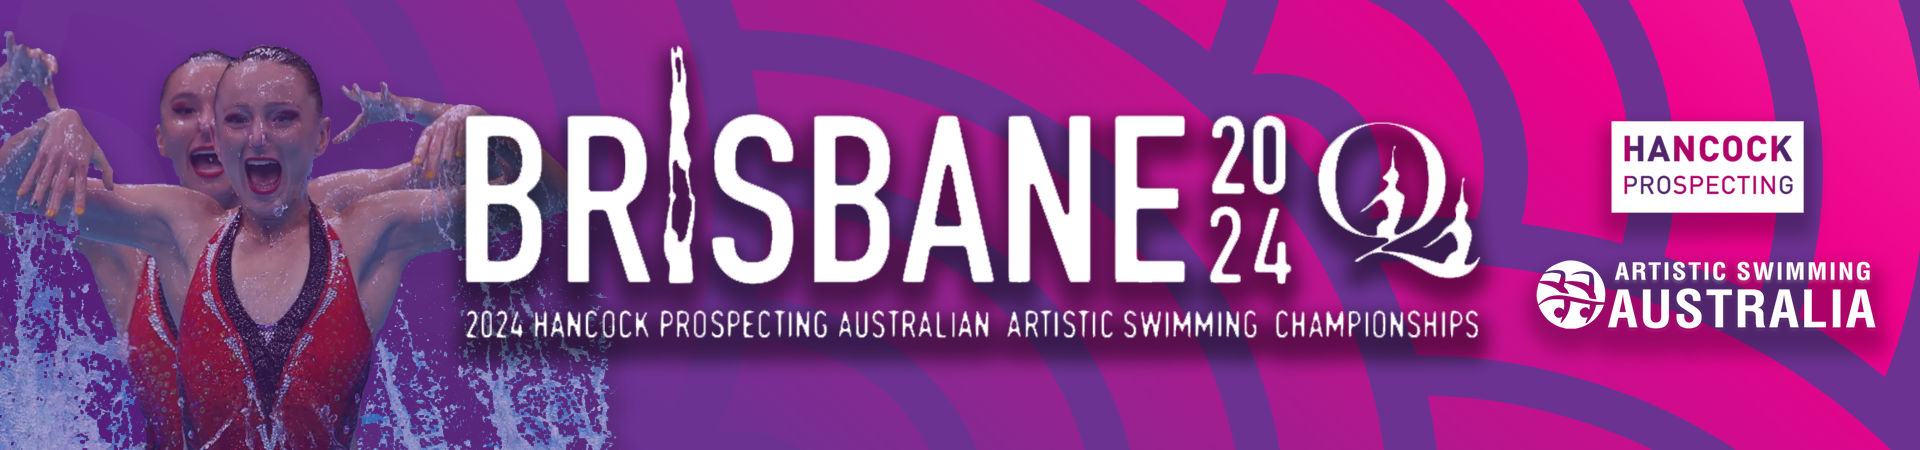 Artistic Swimming Channel Header Cover Image